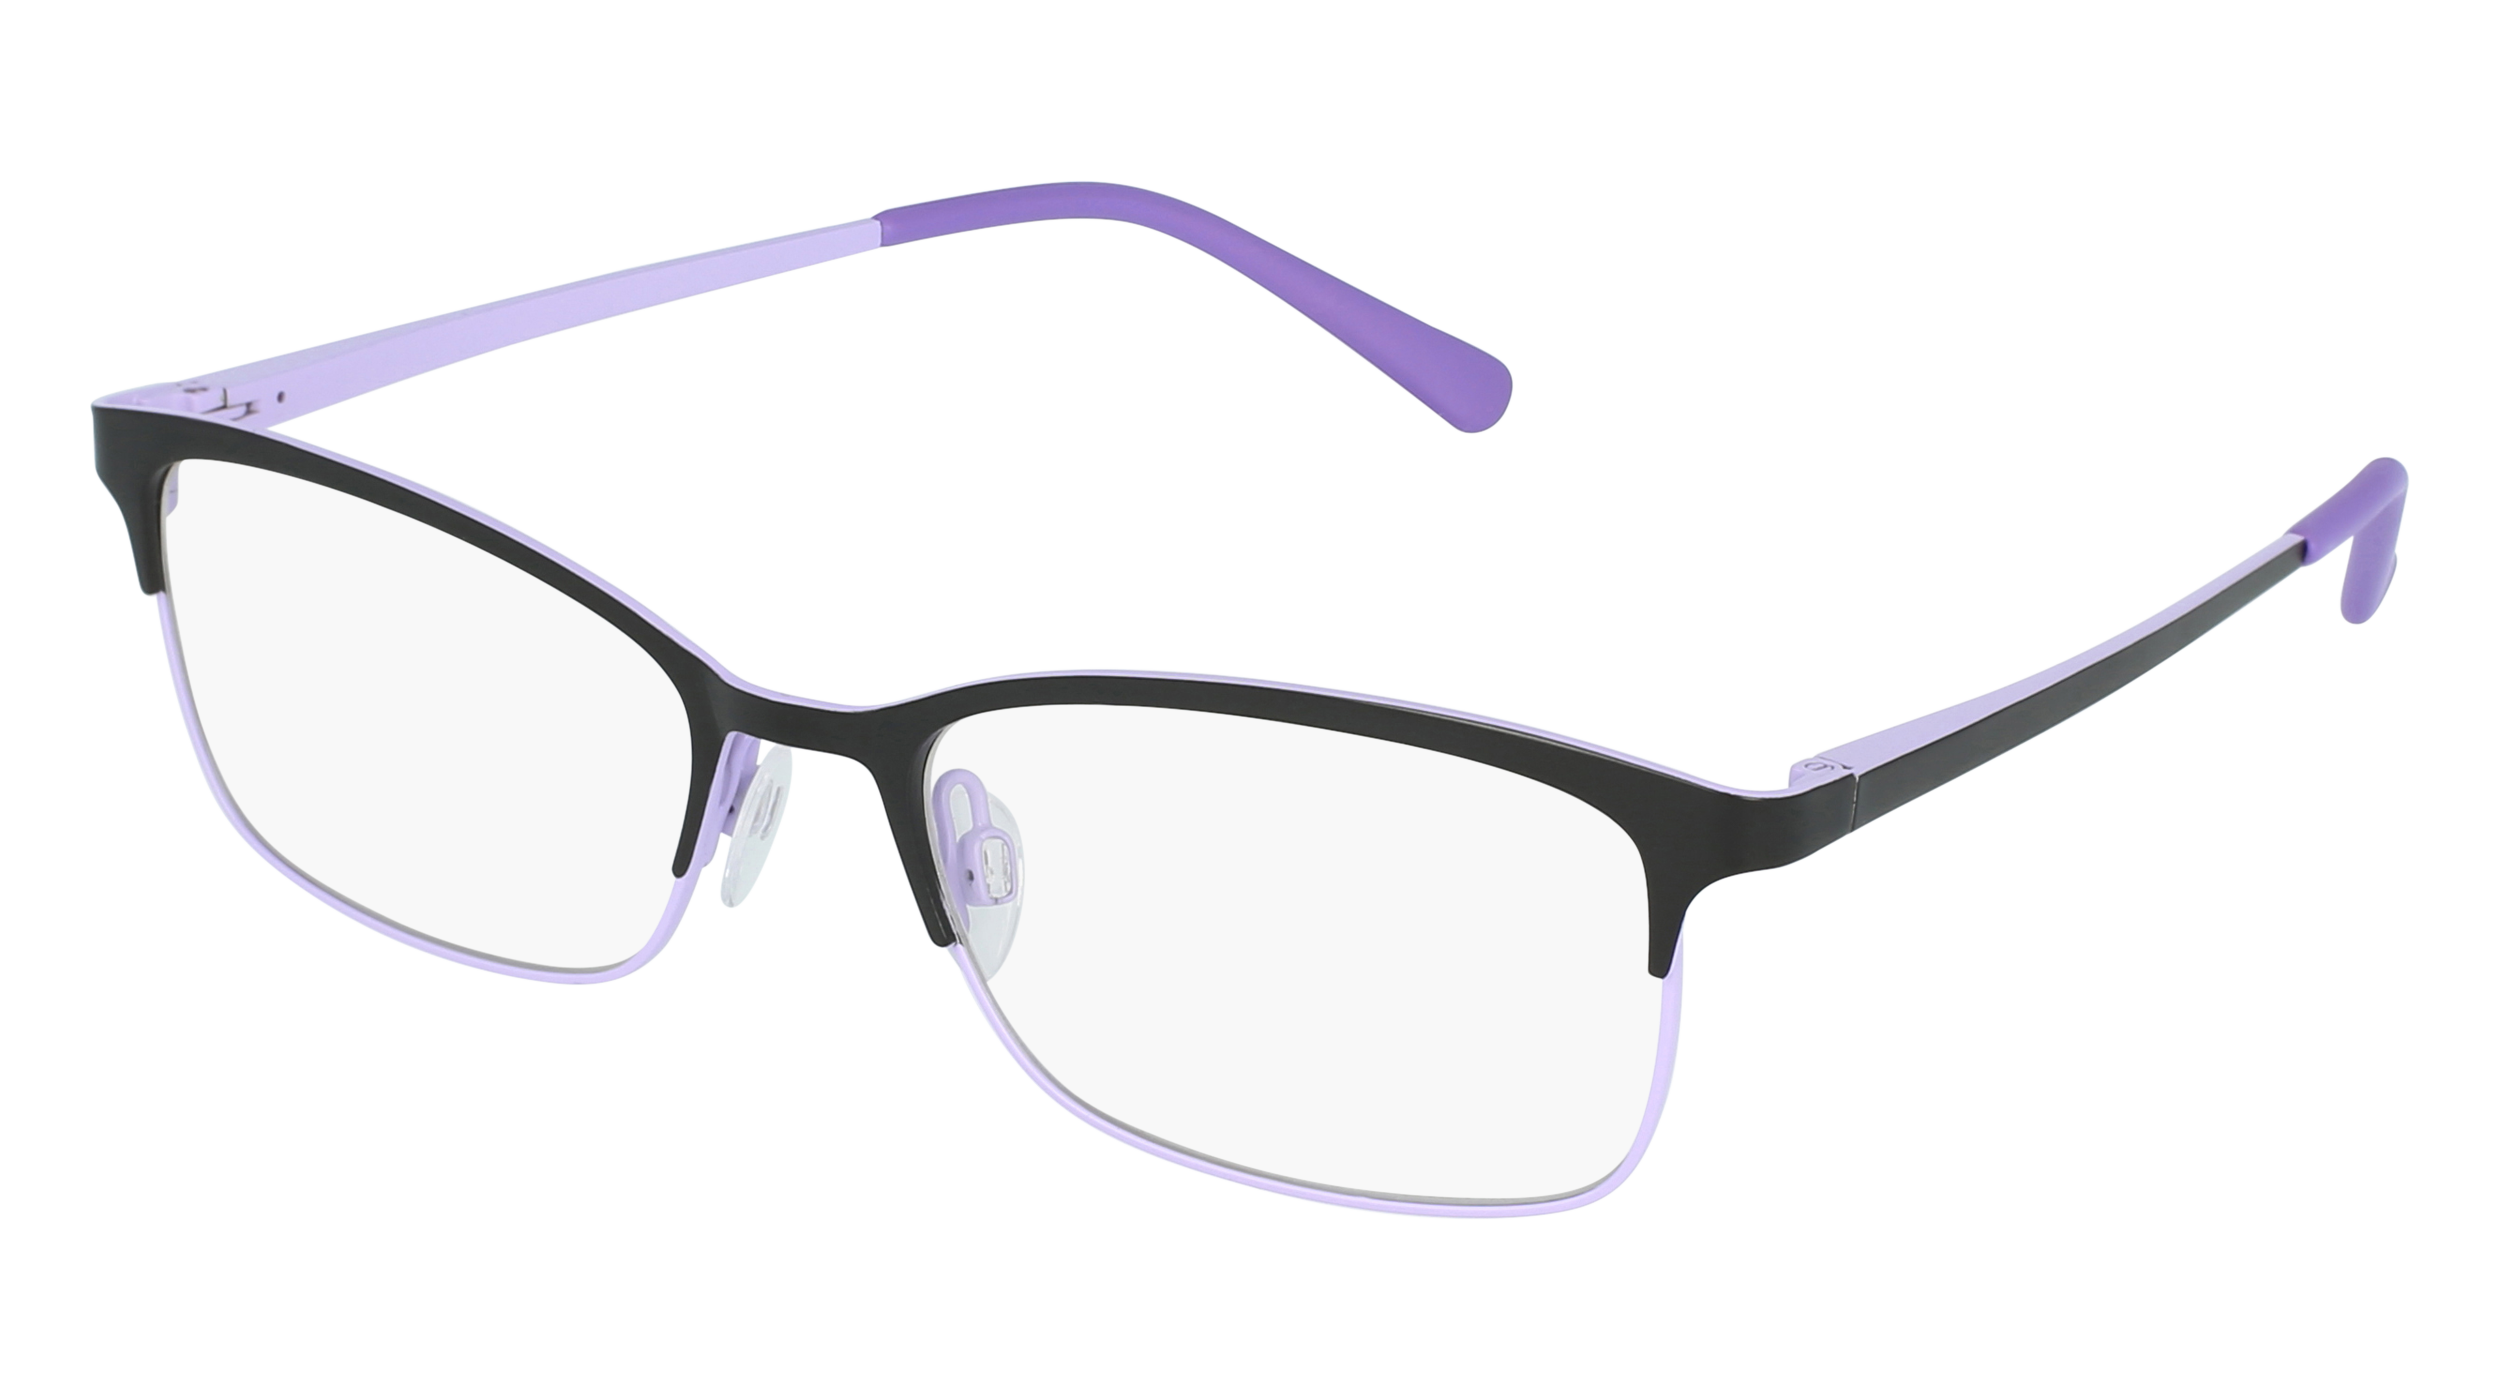 a AN 175 women's eyeglasses (from the side)